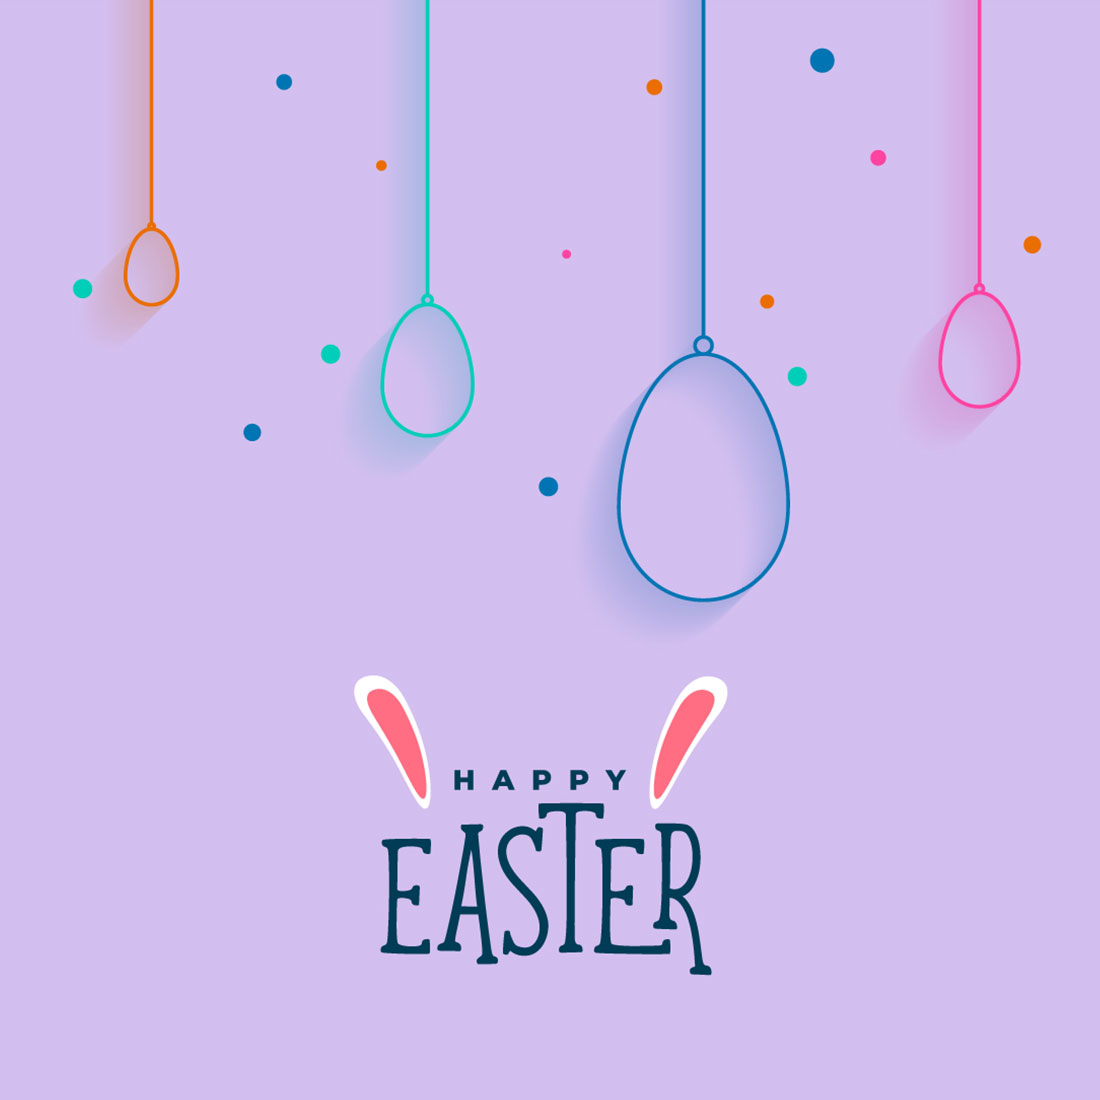 Happy easter card with eggs hanging from a line.